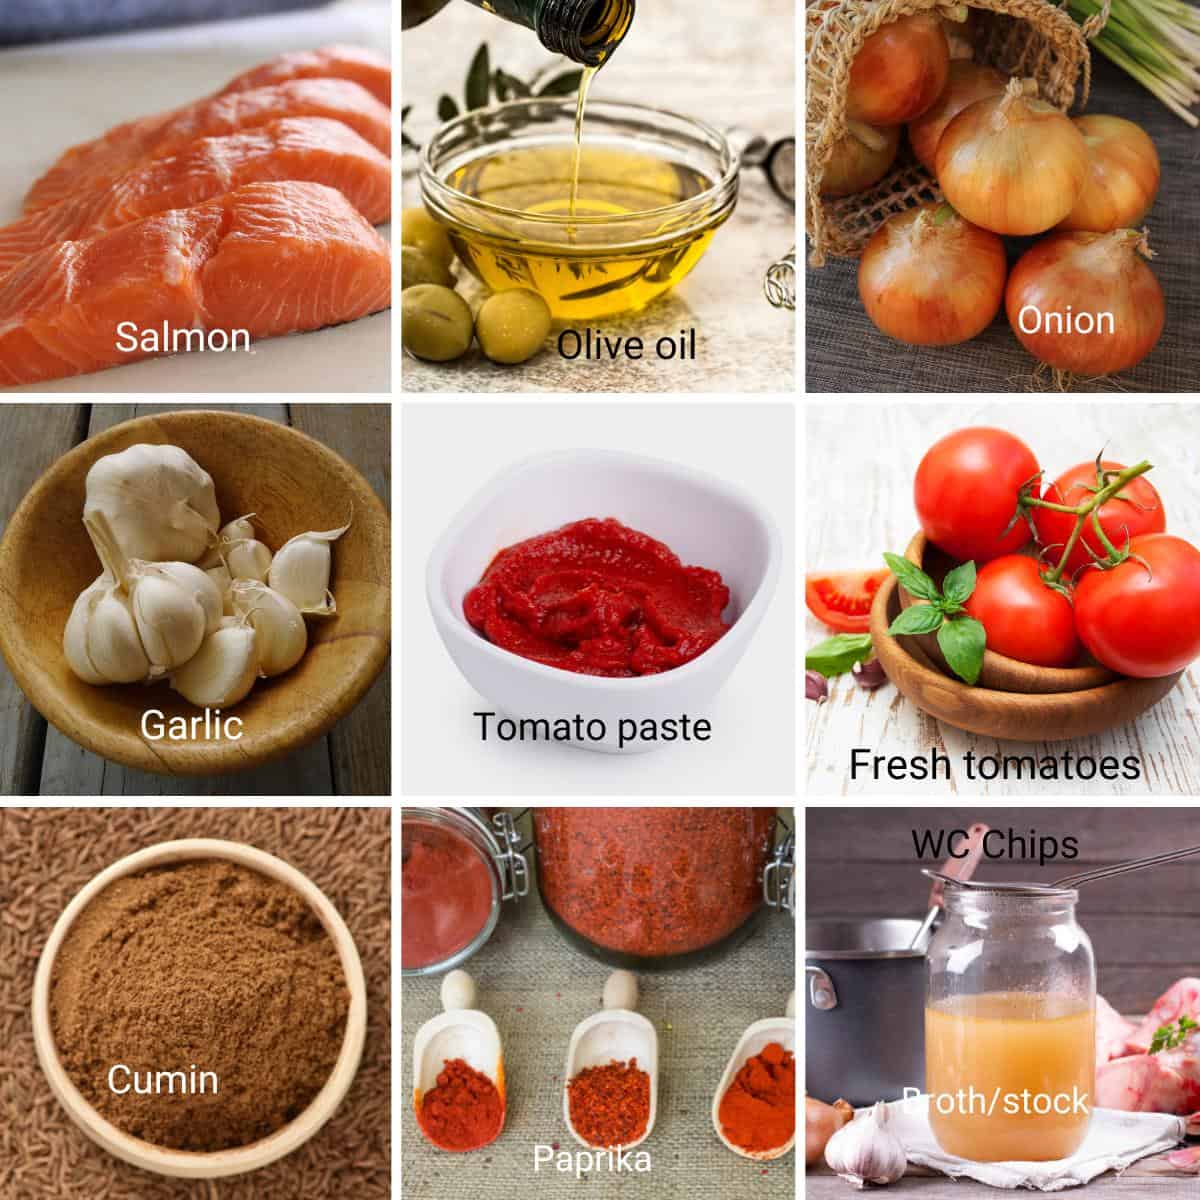 Ingredients for Salmon in tomato sauce.